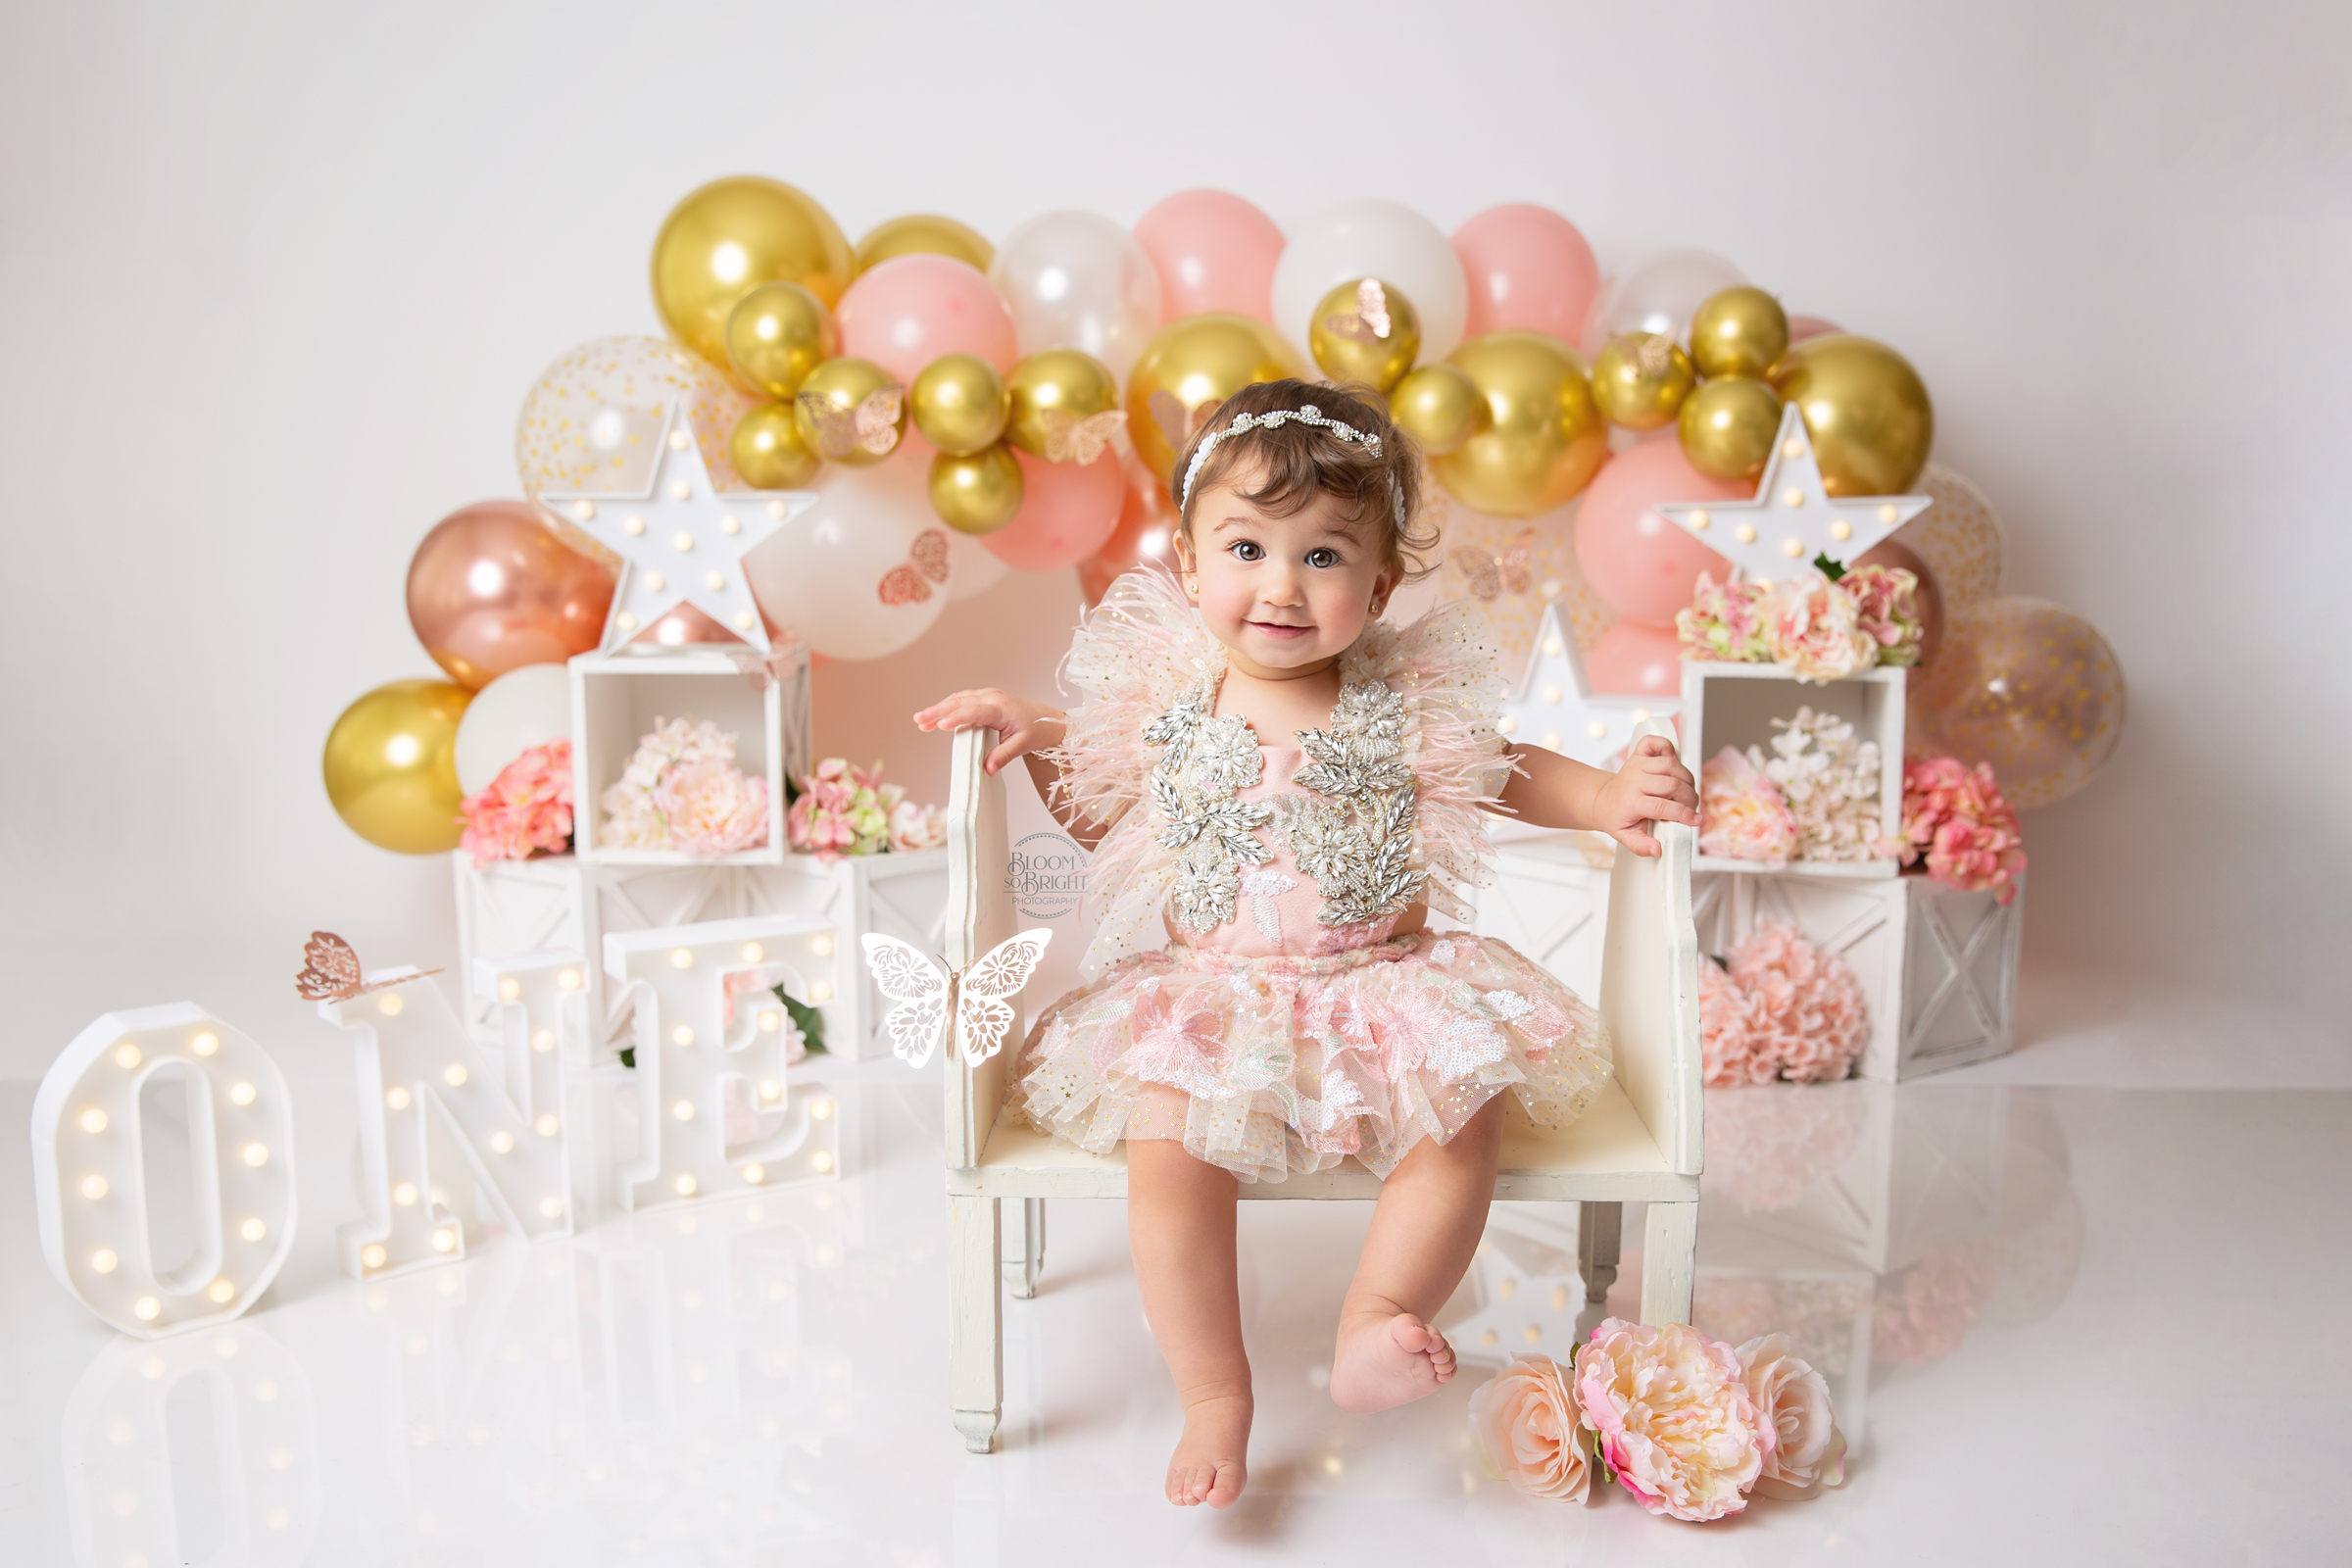 One-year old girl sitting in front of gold, pink and white themed balloons.